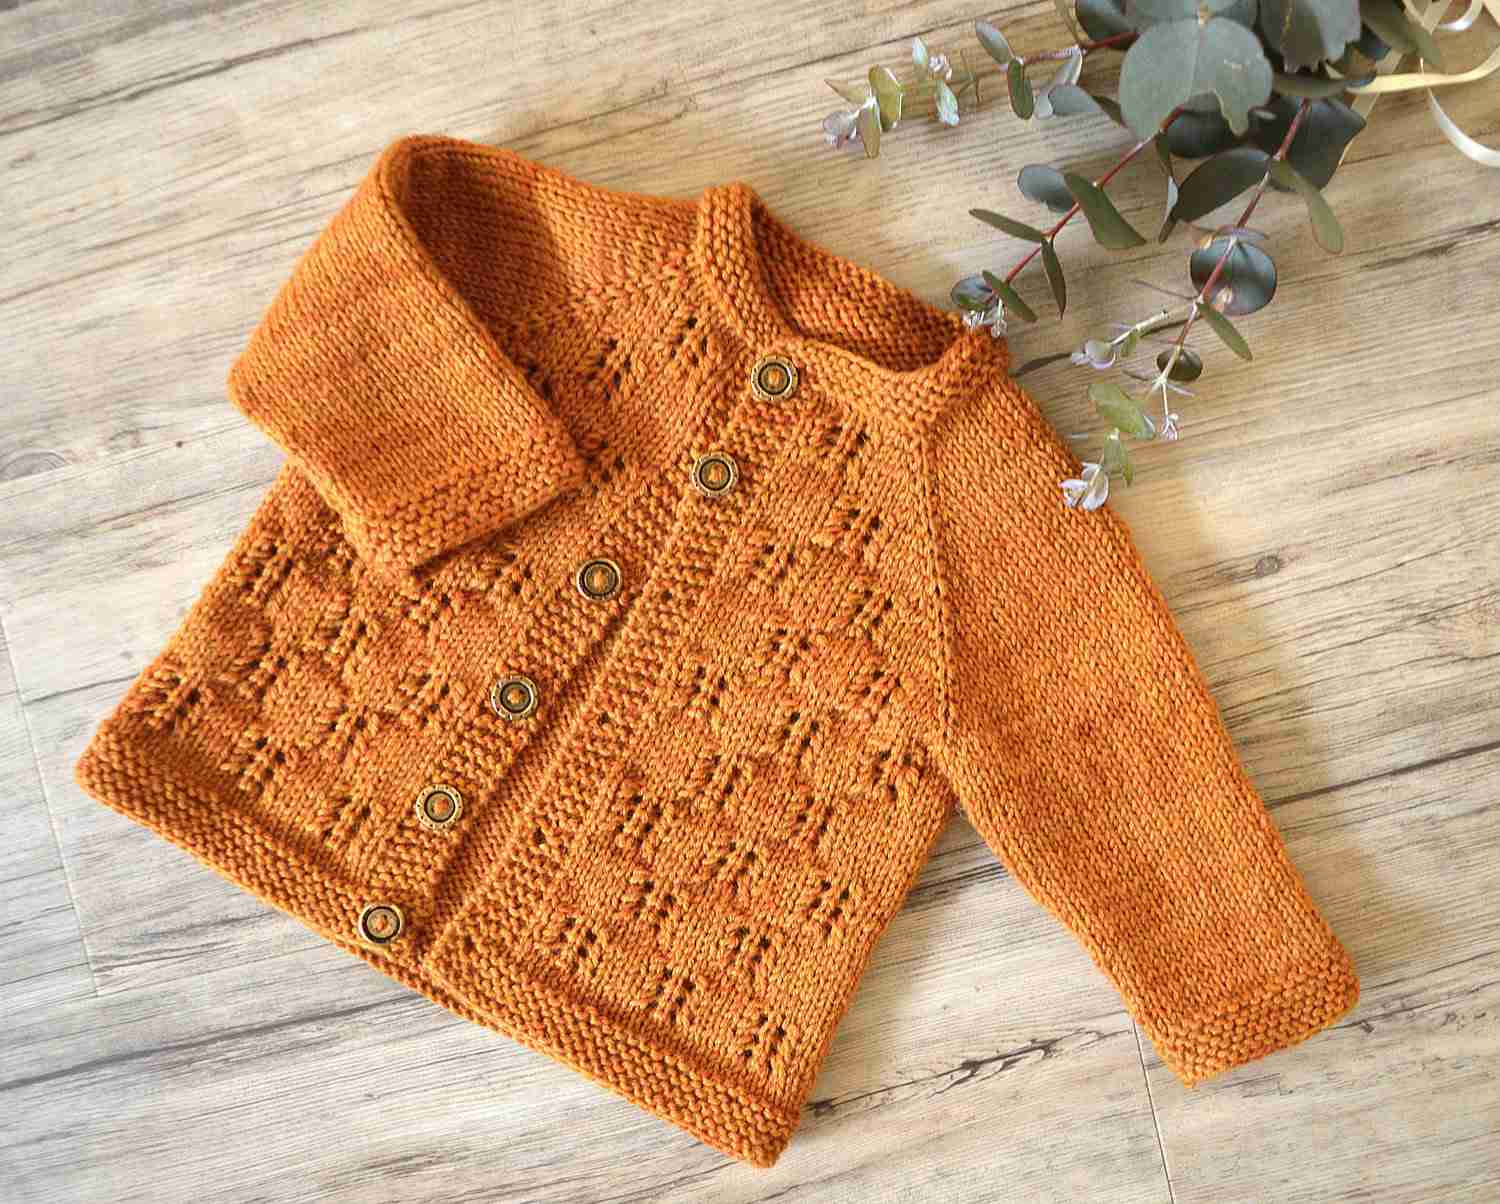 Newborn Knit Patterns 25 Best Knitting Patterns For Ba Clothes Accessories